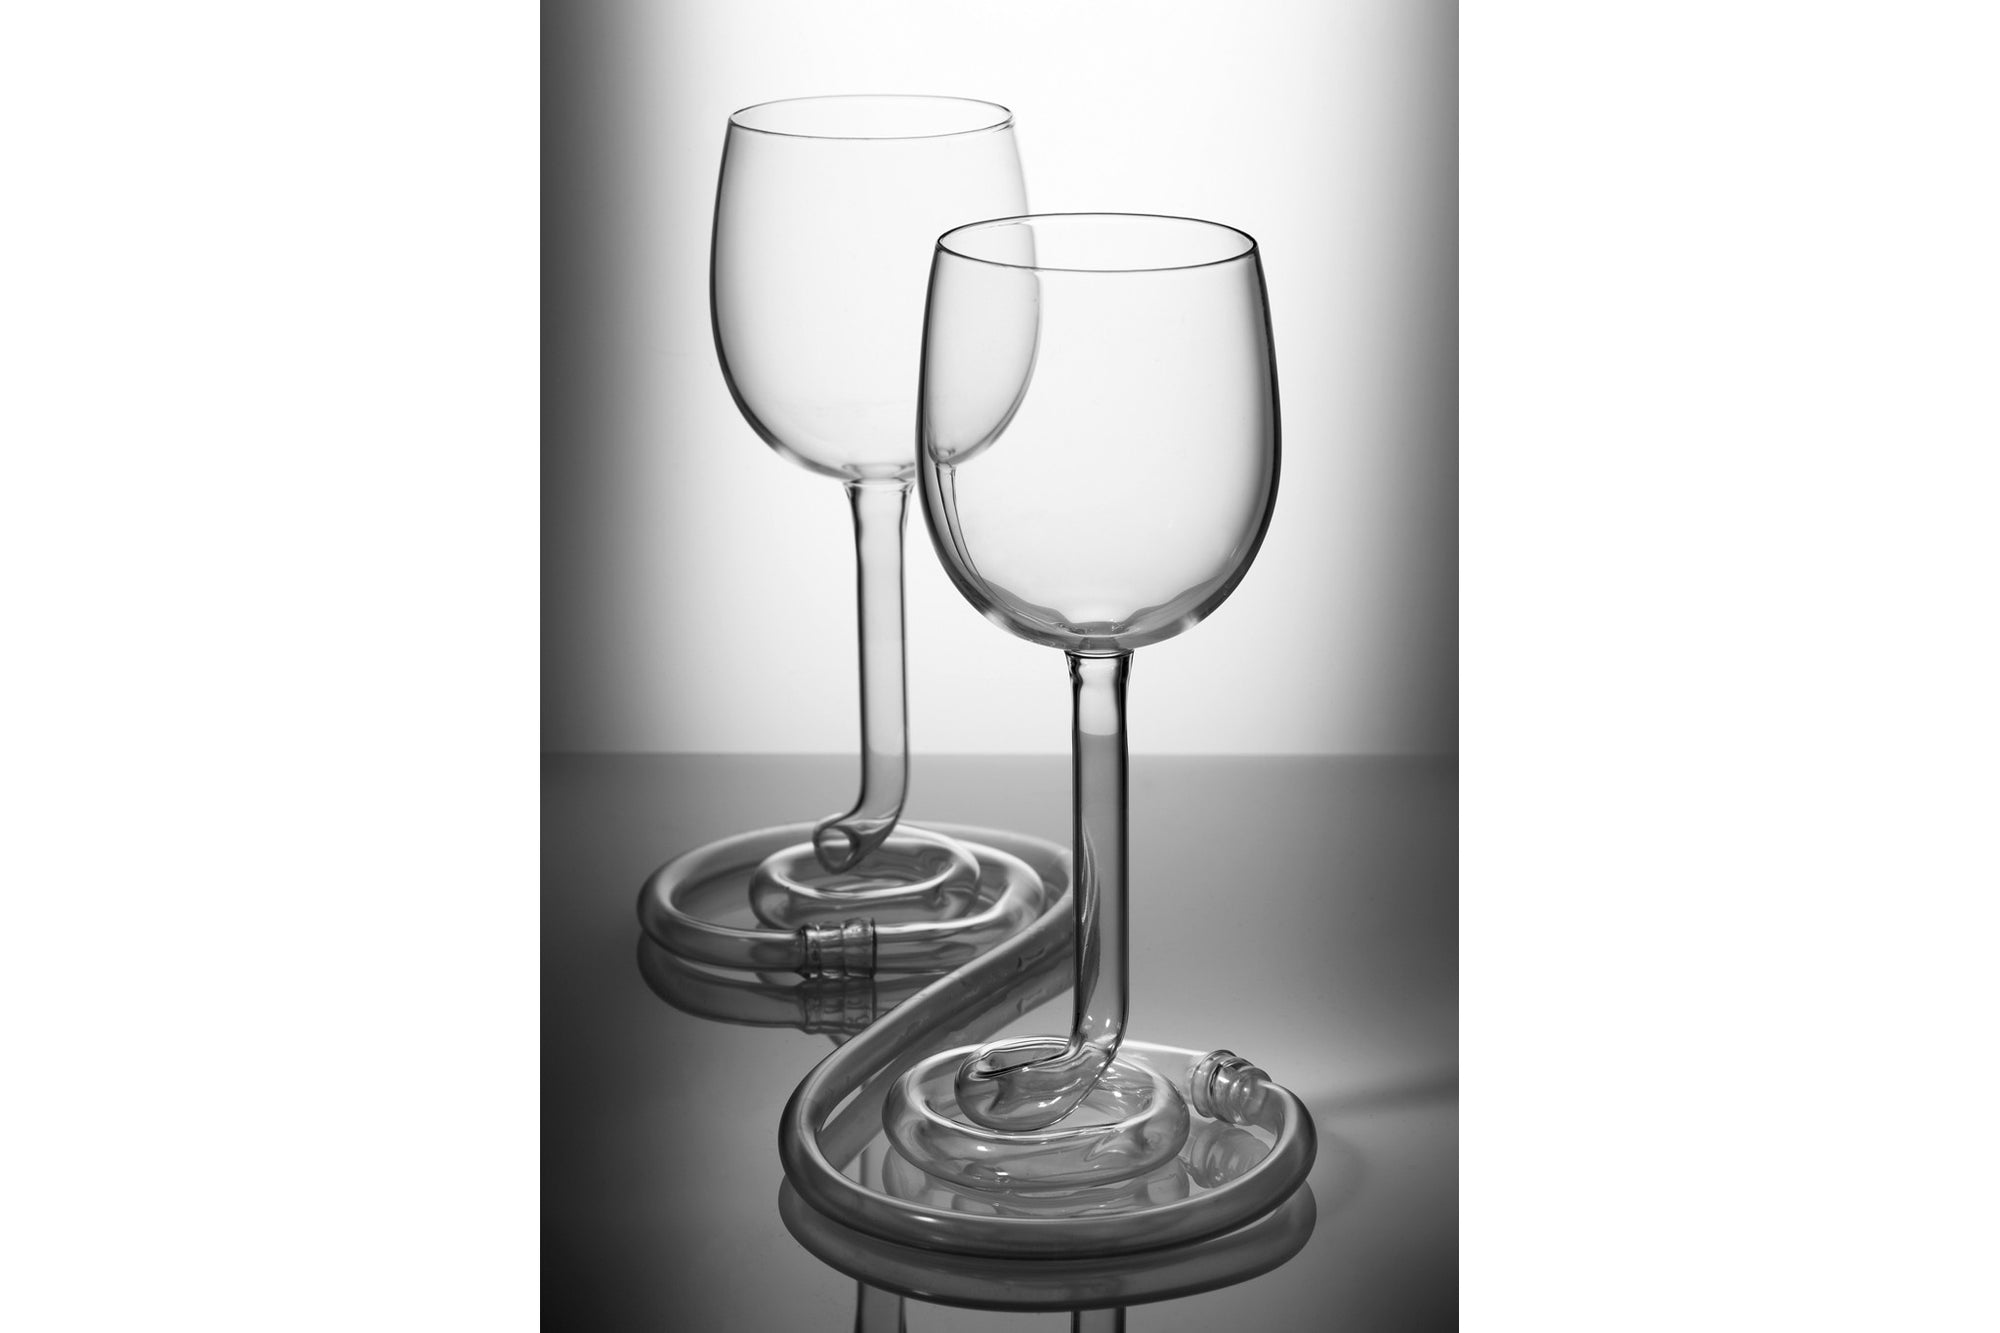 MY OTHER HALF - wine glasses. Photograph by David Hendley